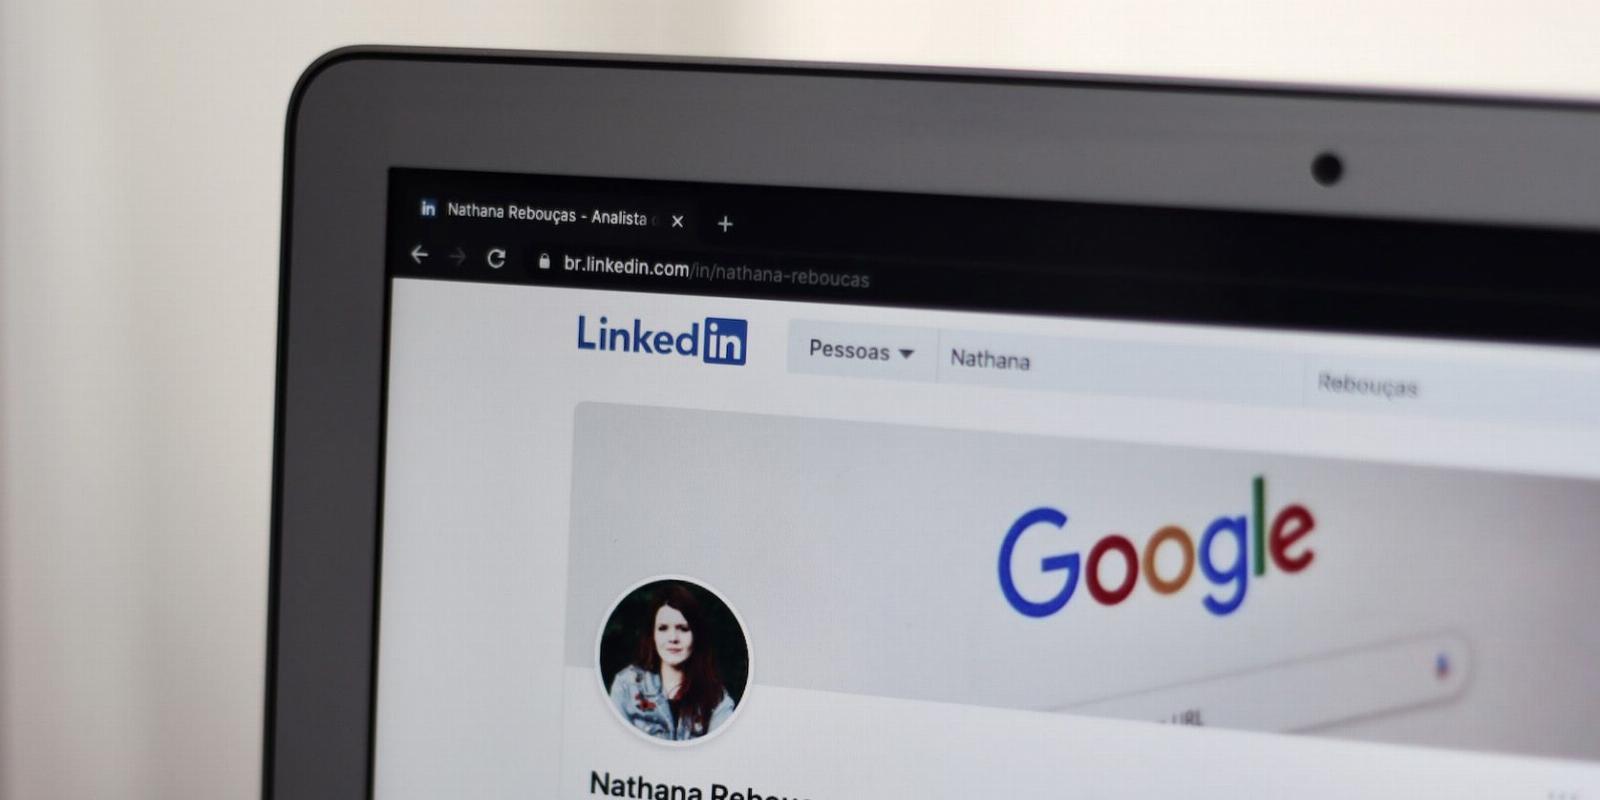 How to Show or Hide Your LinkedIn Premium Badge